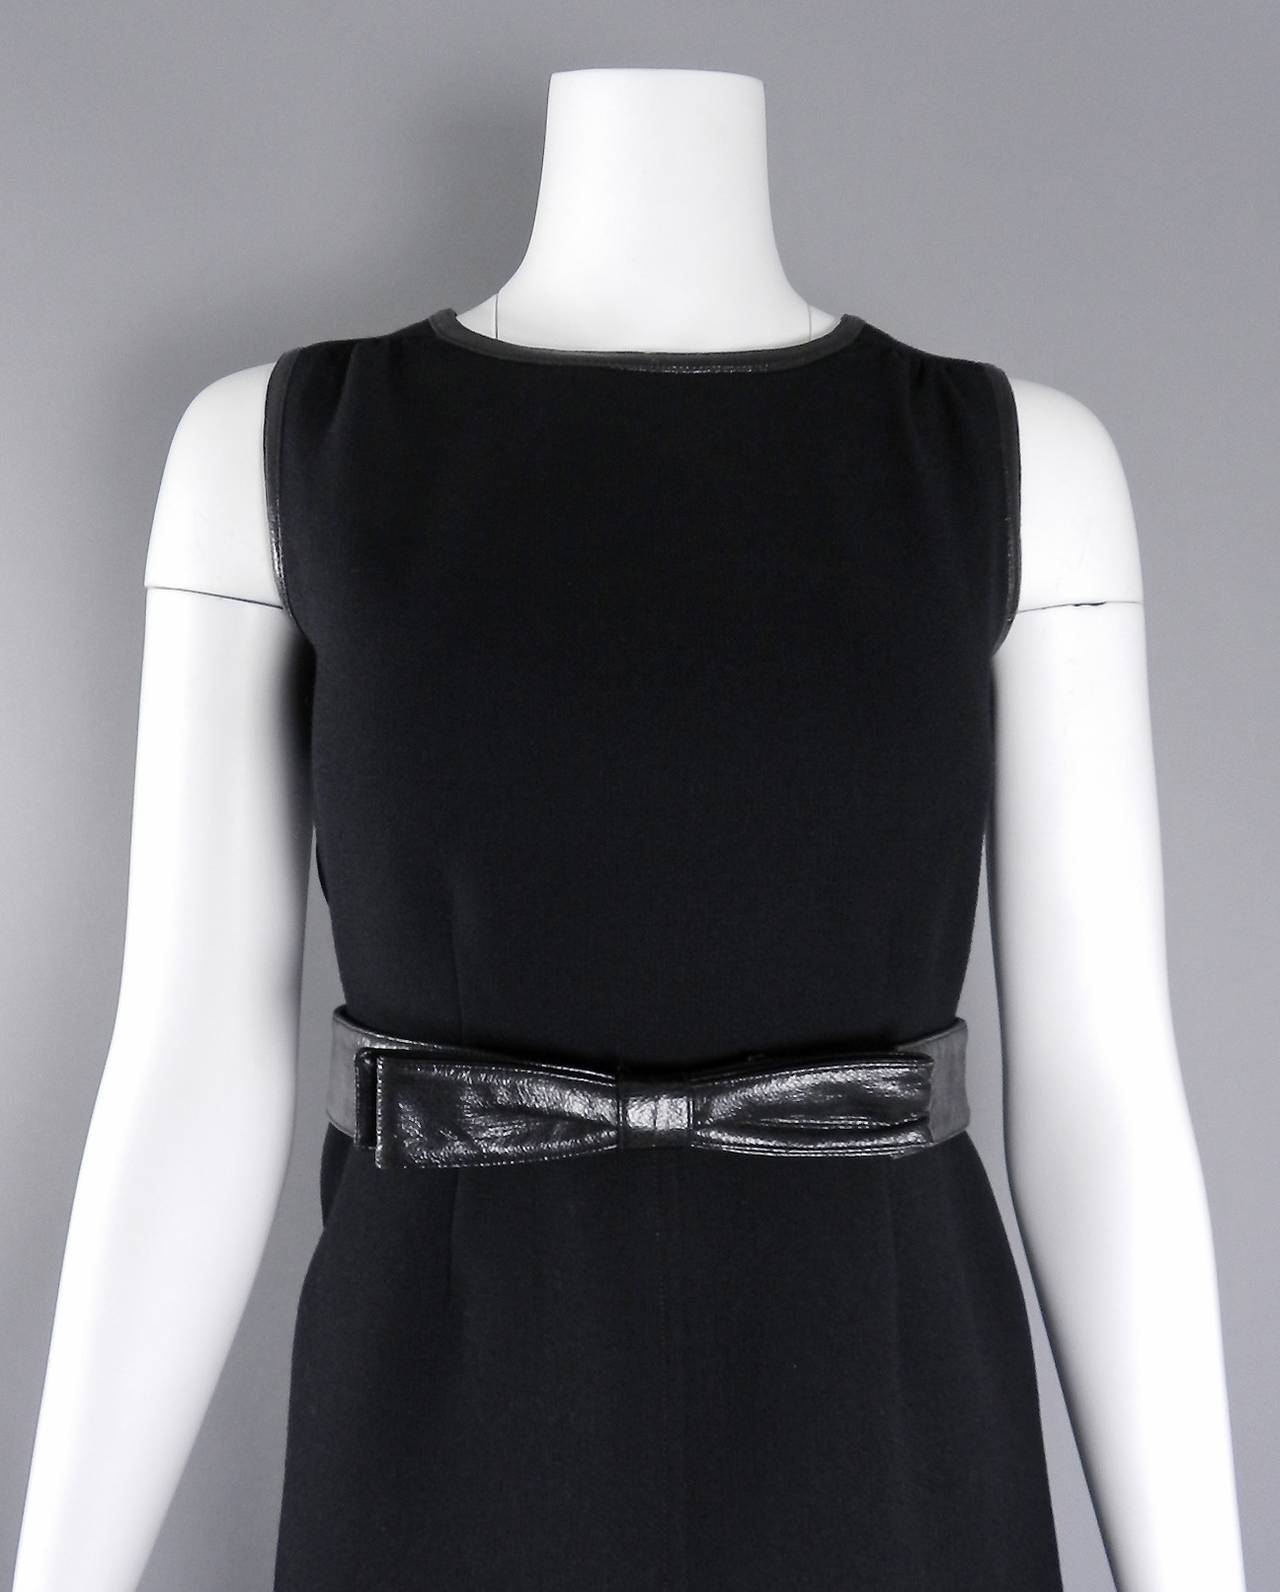 Vintage 1960's Courreges black wool gown with vinyl trim. Centre metal back zipper, lined with white fabric, medium to thick wool. Excellent vintage condition but vinyl trim around armholes shows minor wear appropriate with age. Garment has small